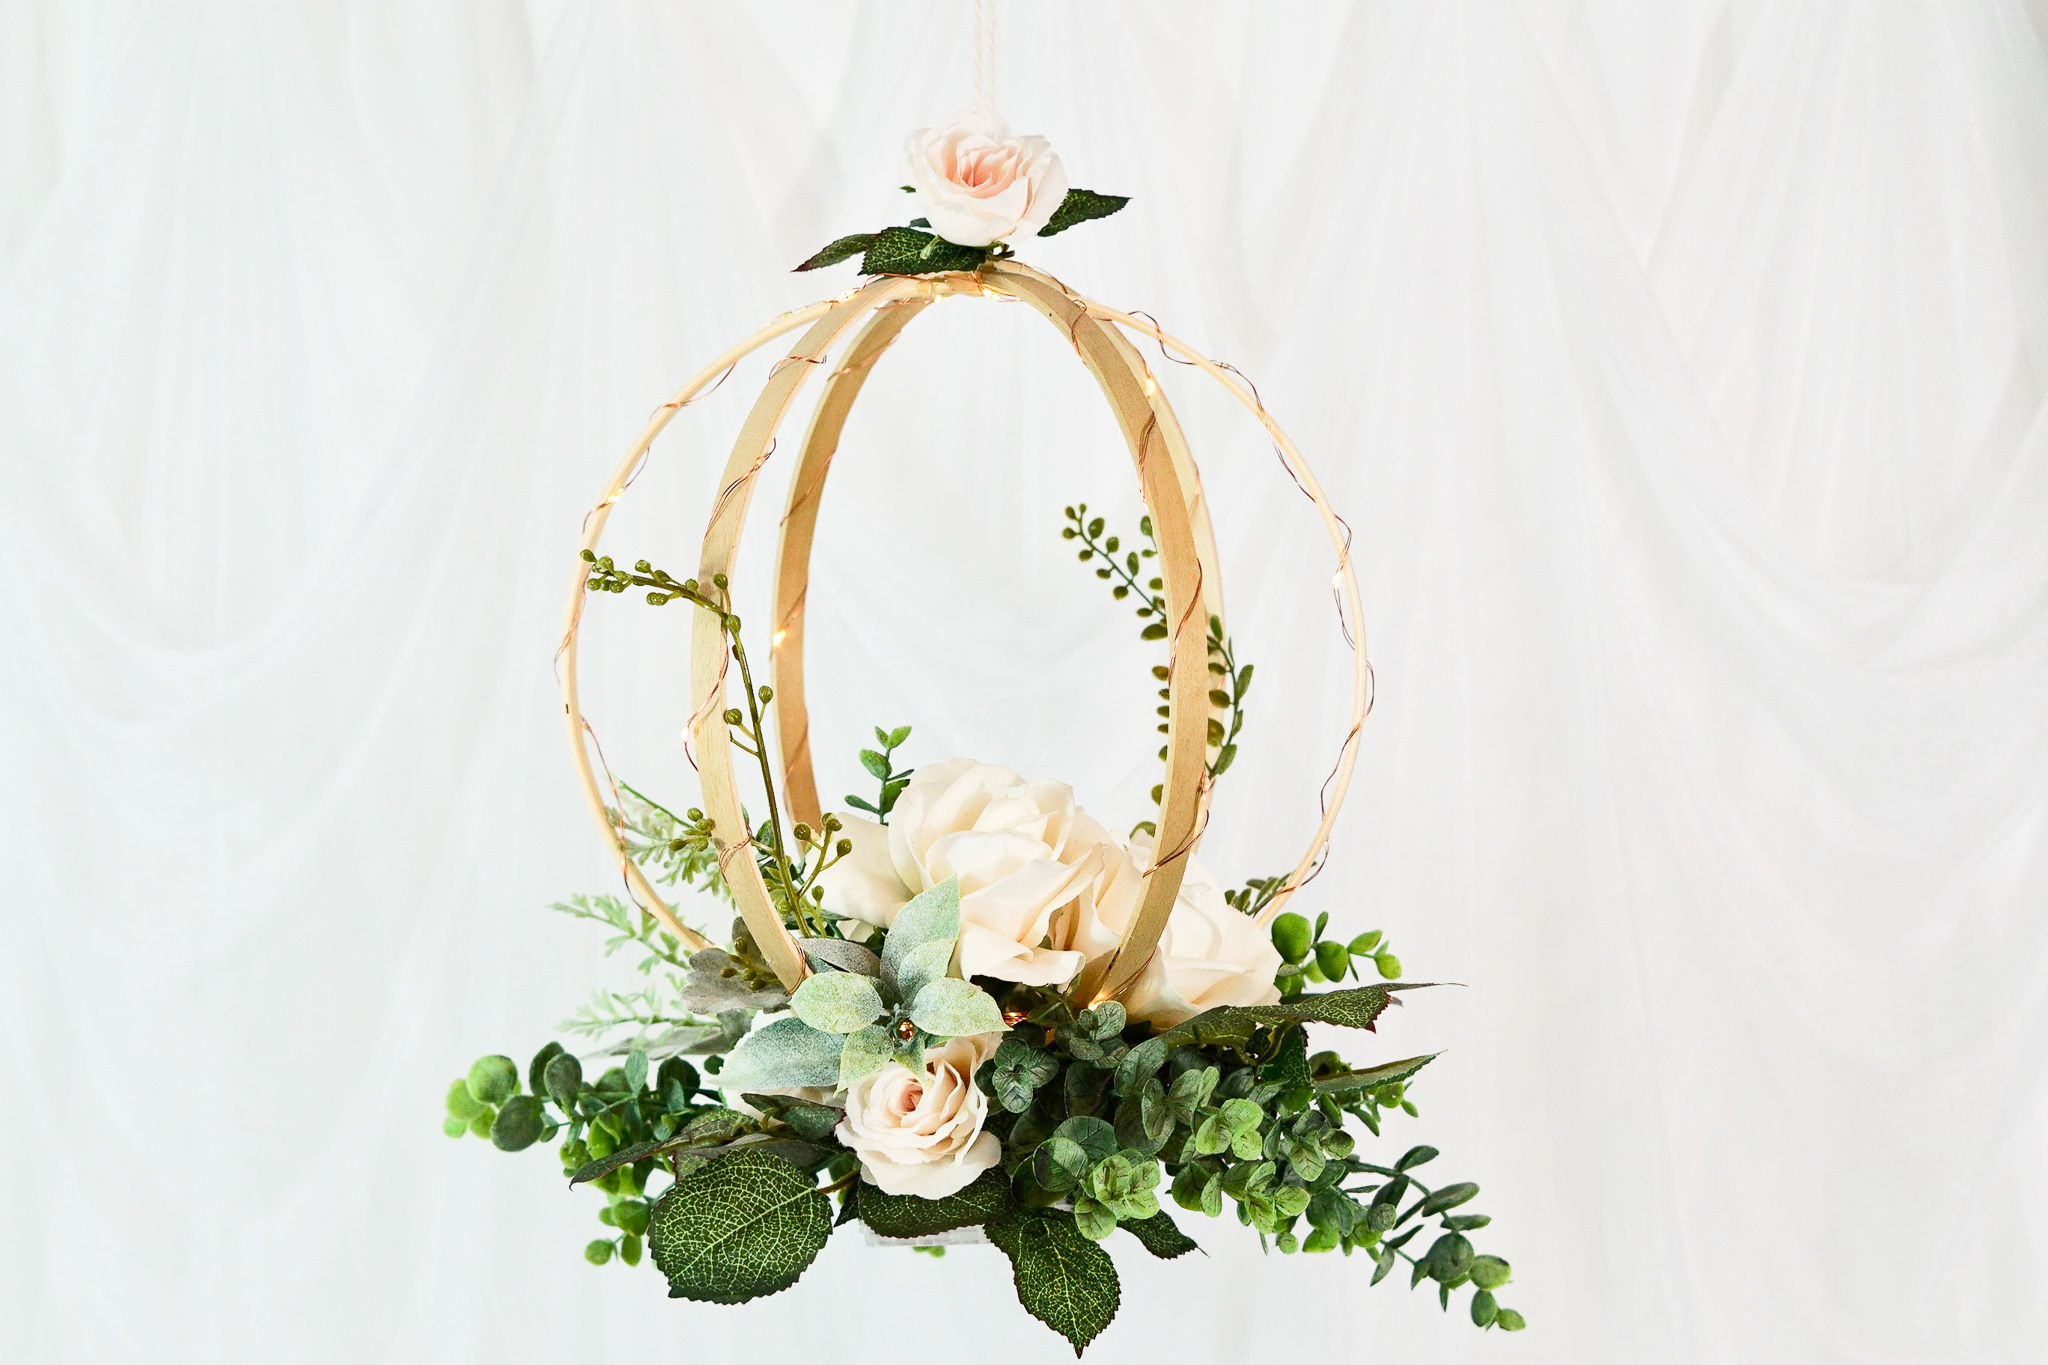 Light bulb flower and plant embroidery hoop